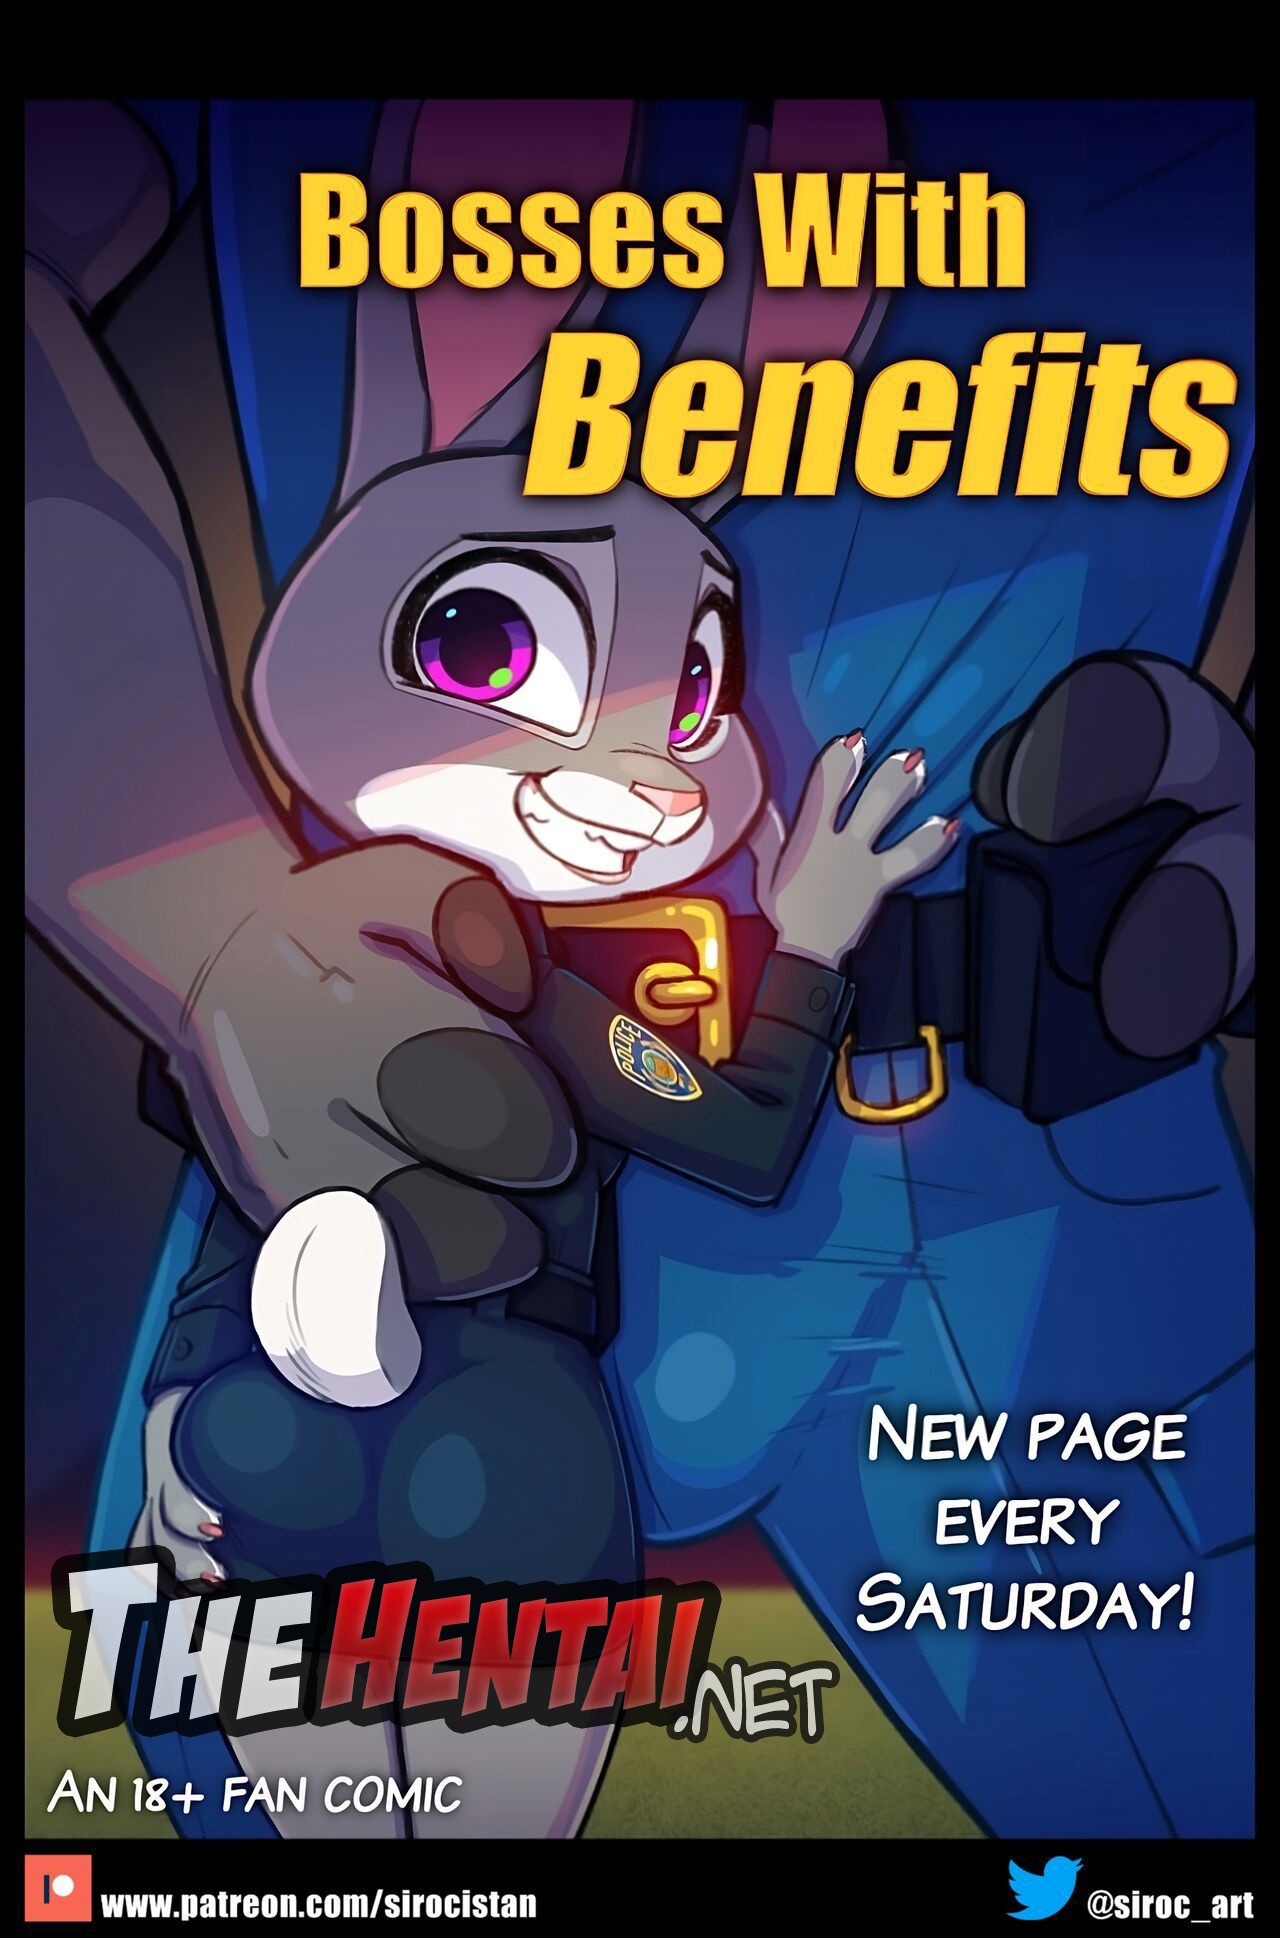 Bosses With Benefits Hentai pt-br 01